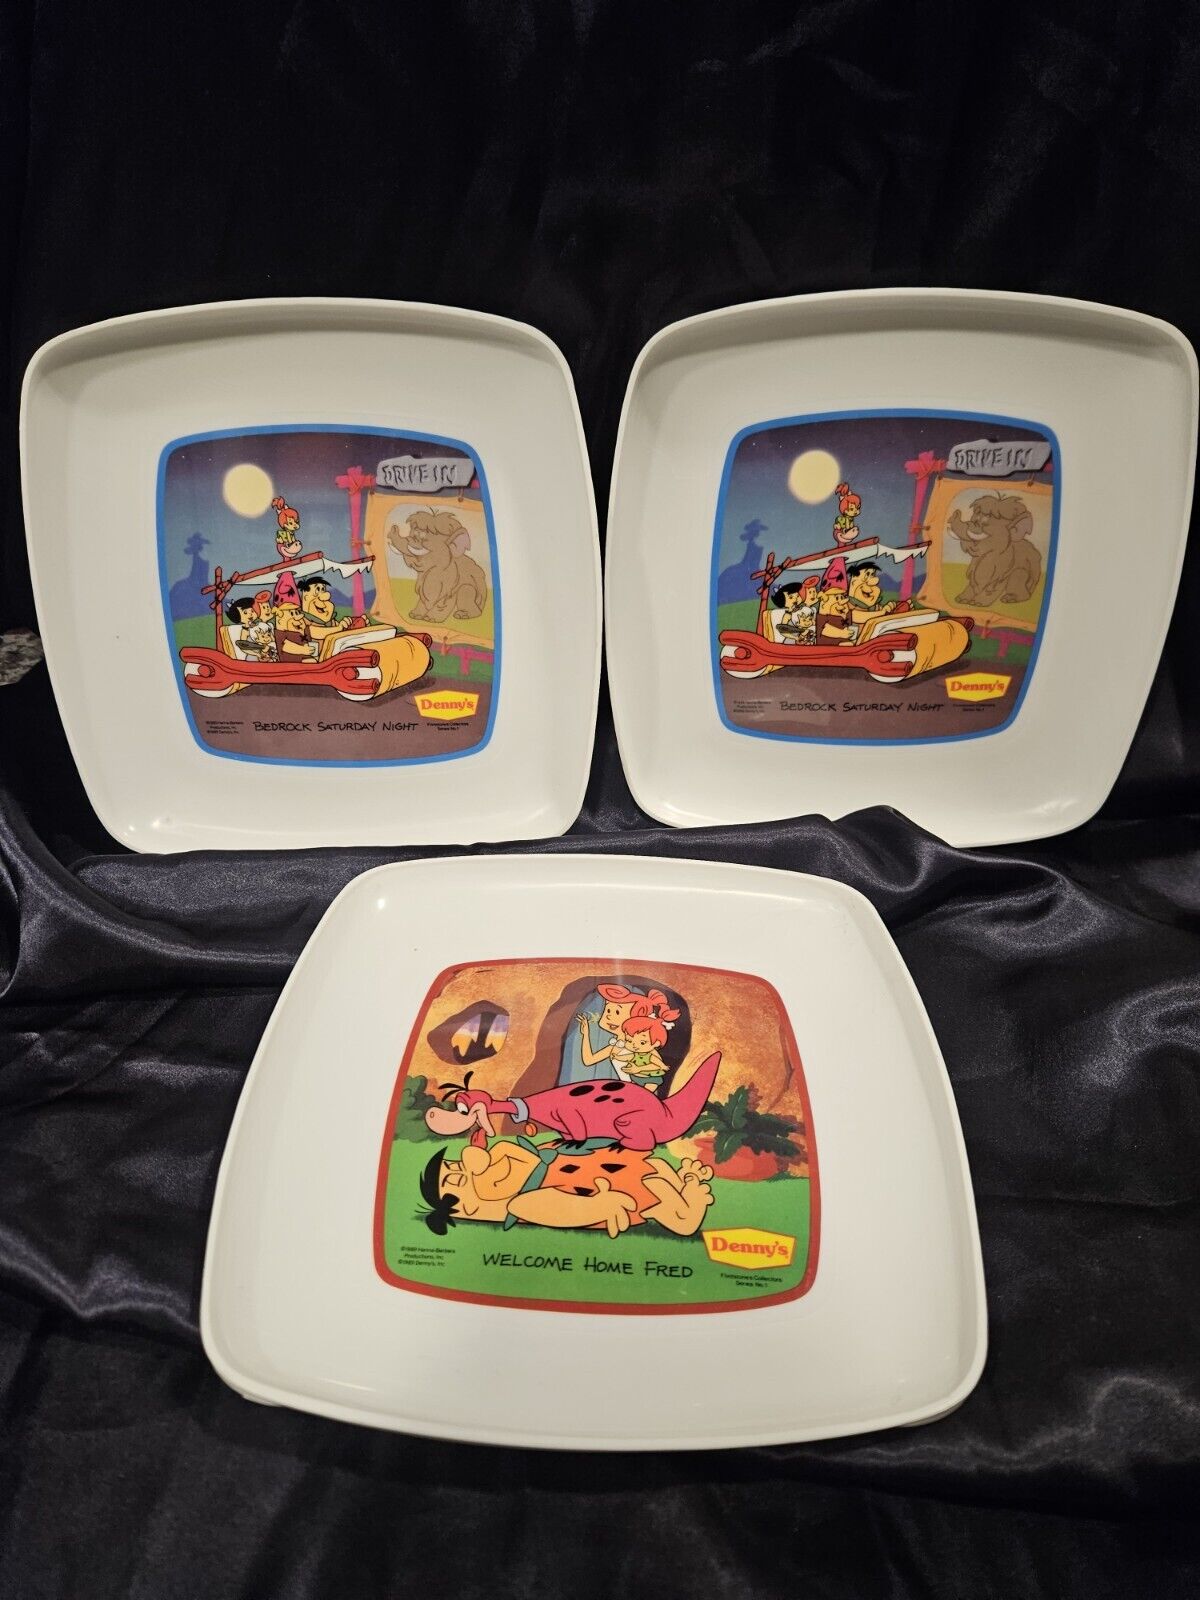 THE FLINSTONES 3 PLATES DENNY’S 1989 VINTAGE  COLLECTIBLES (Two Are The Same). 